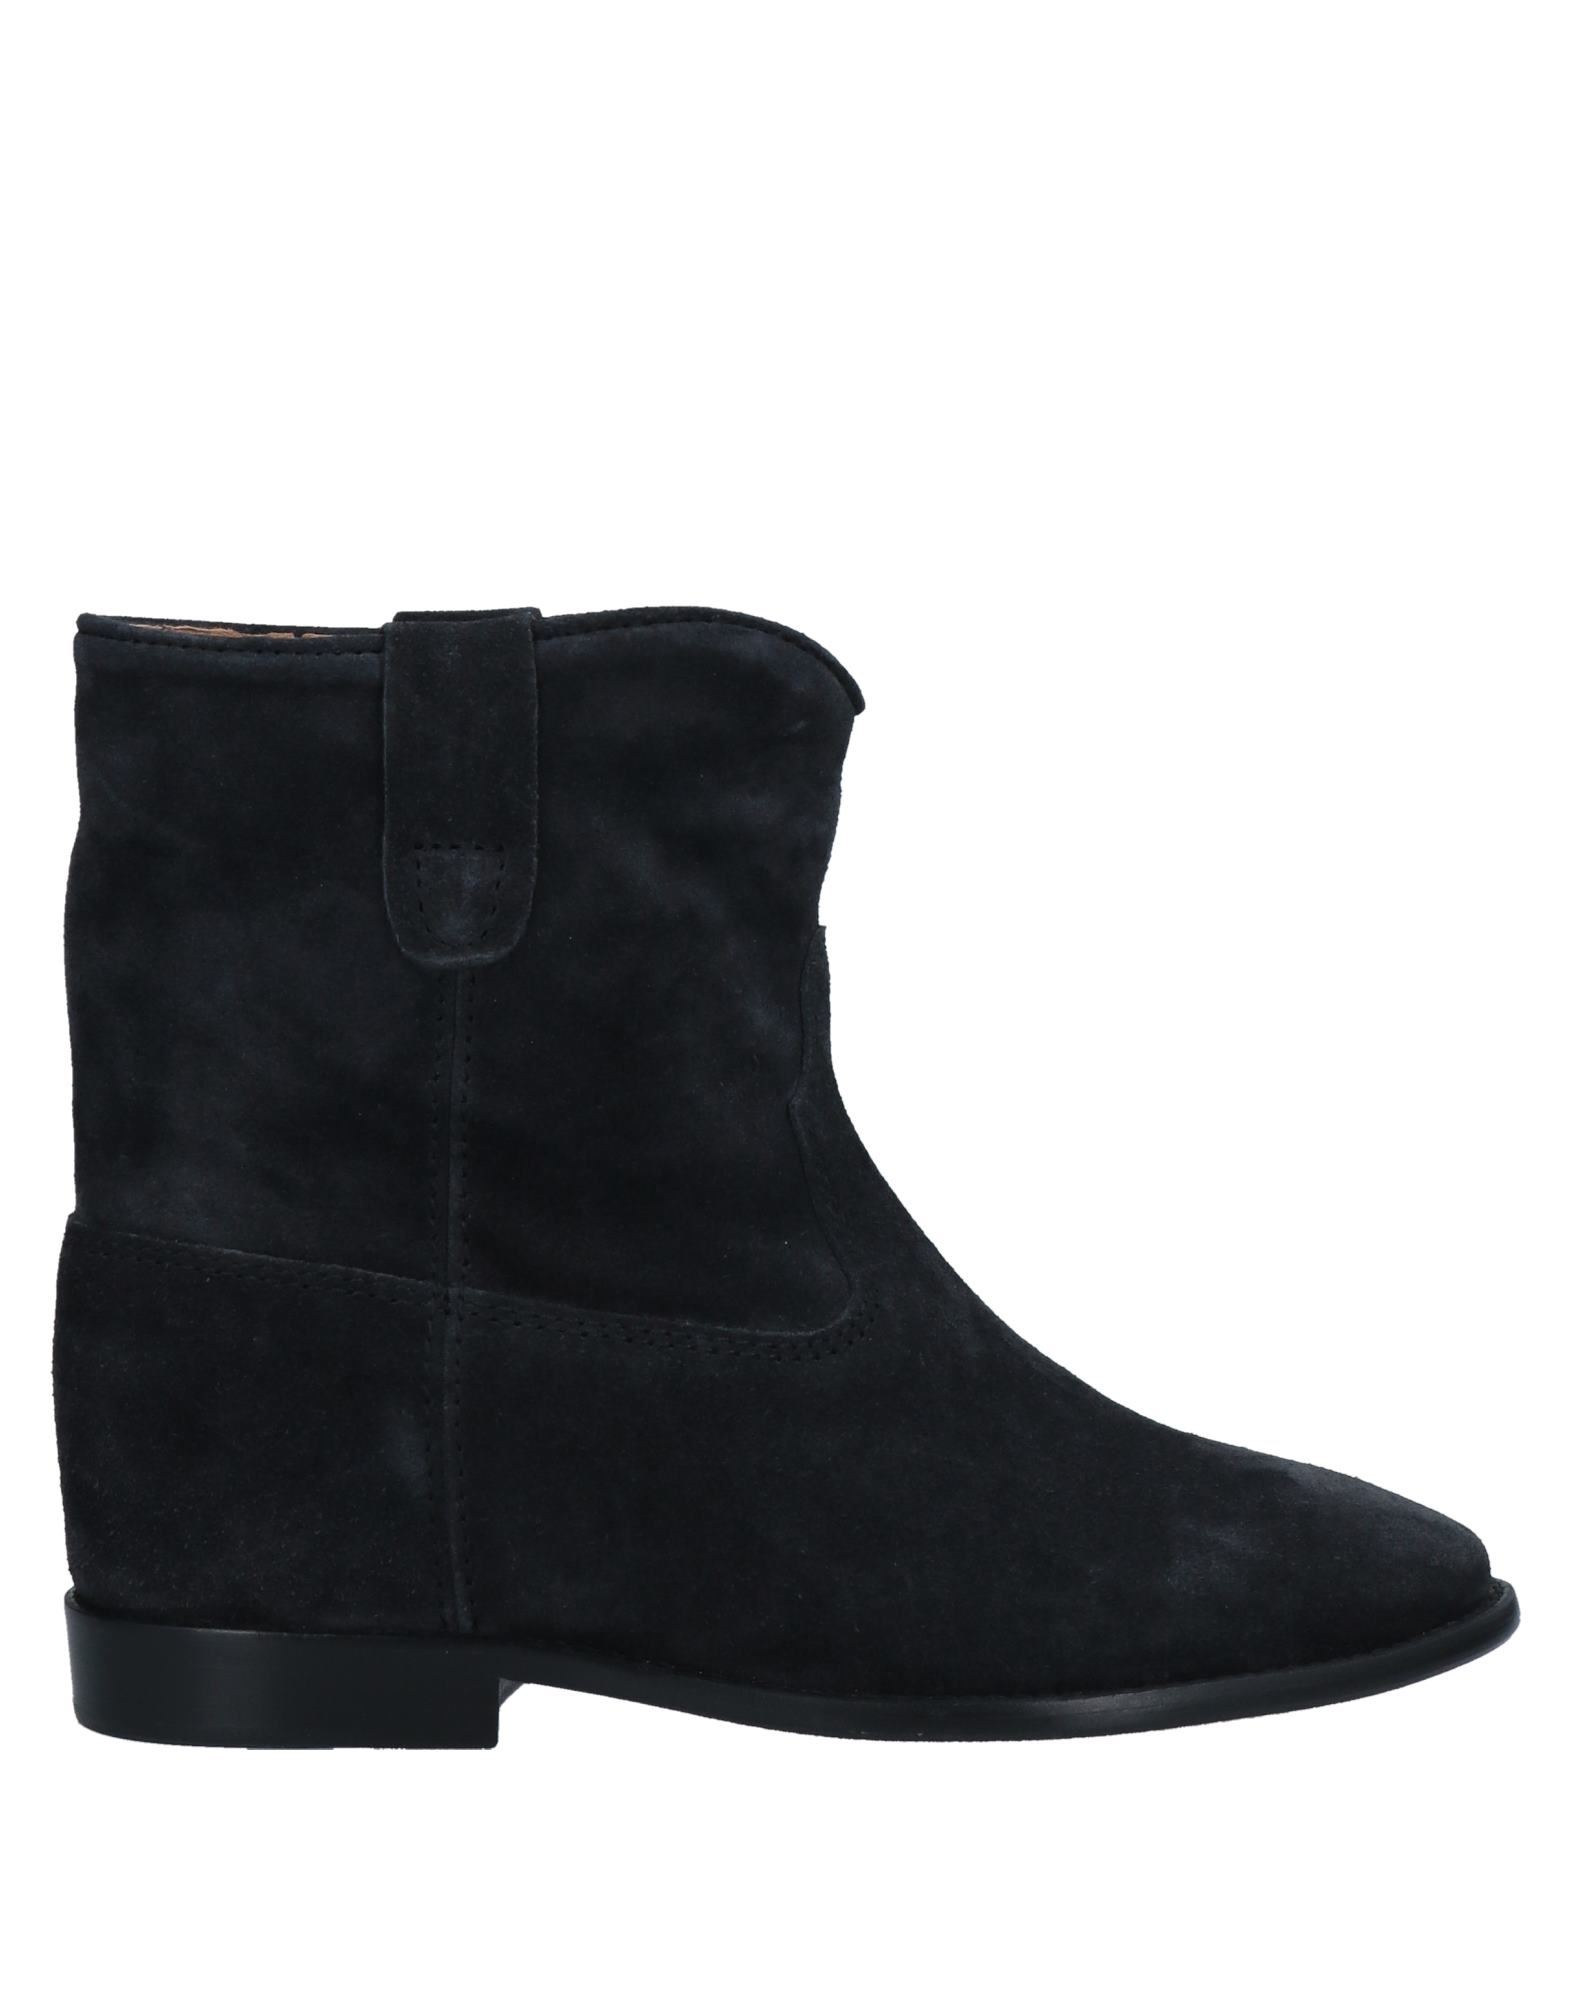 Isabel Marant Ankle Boots In Grey